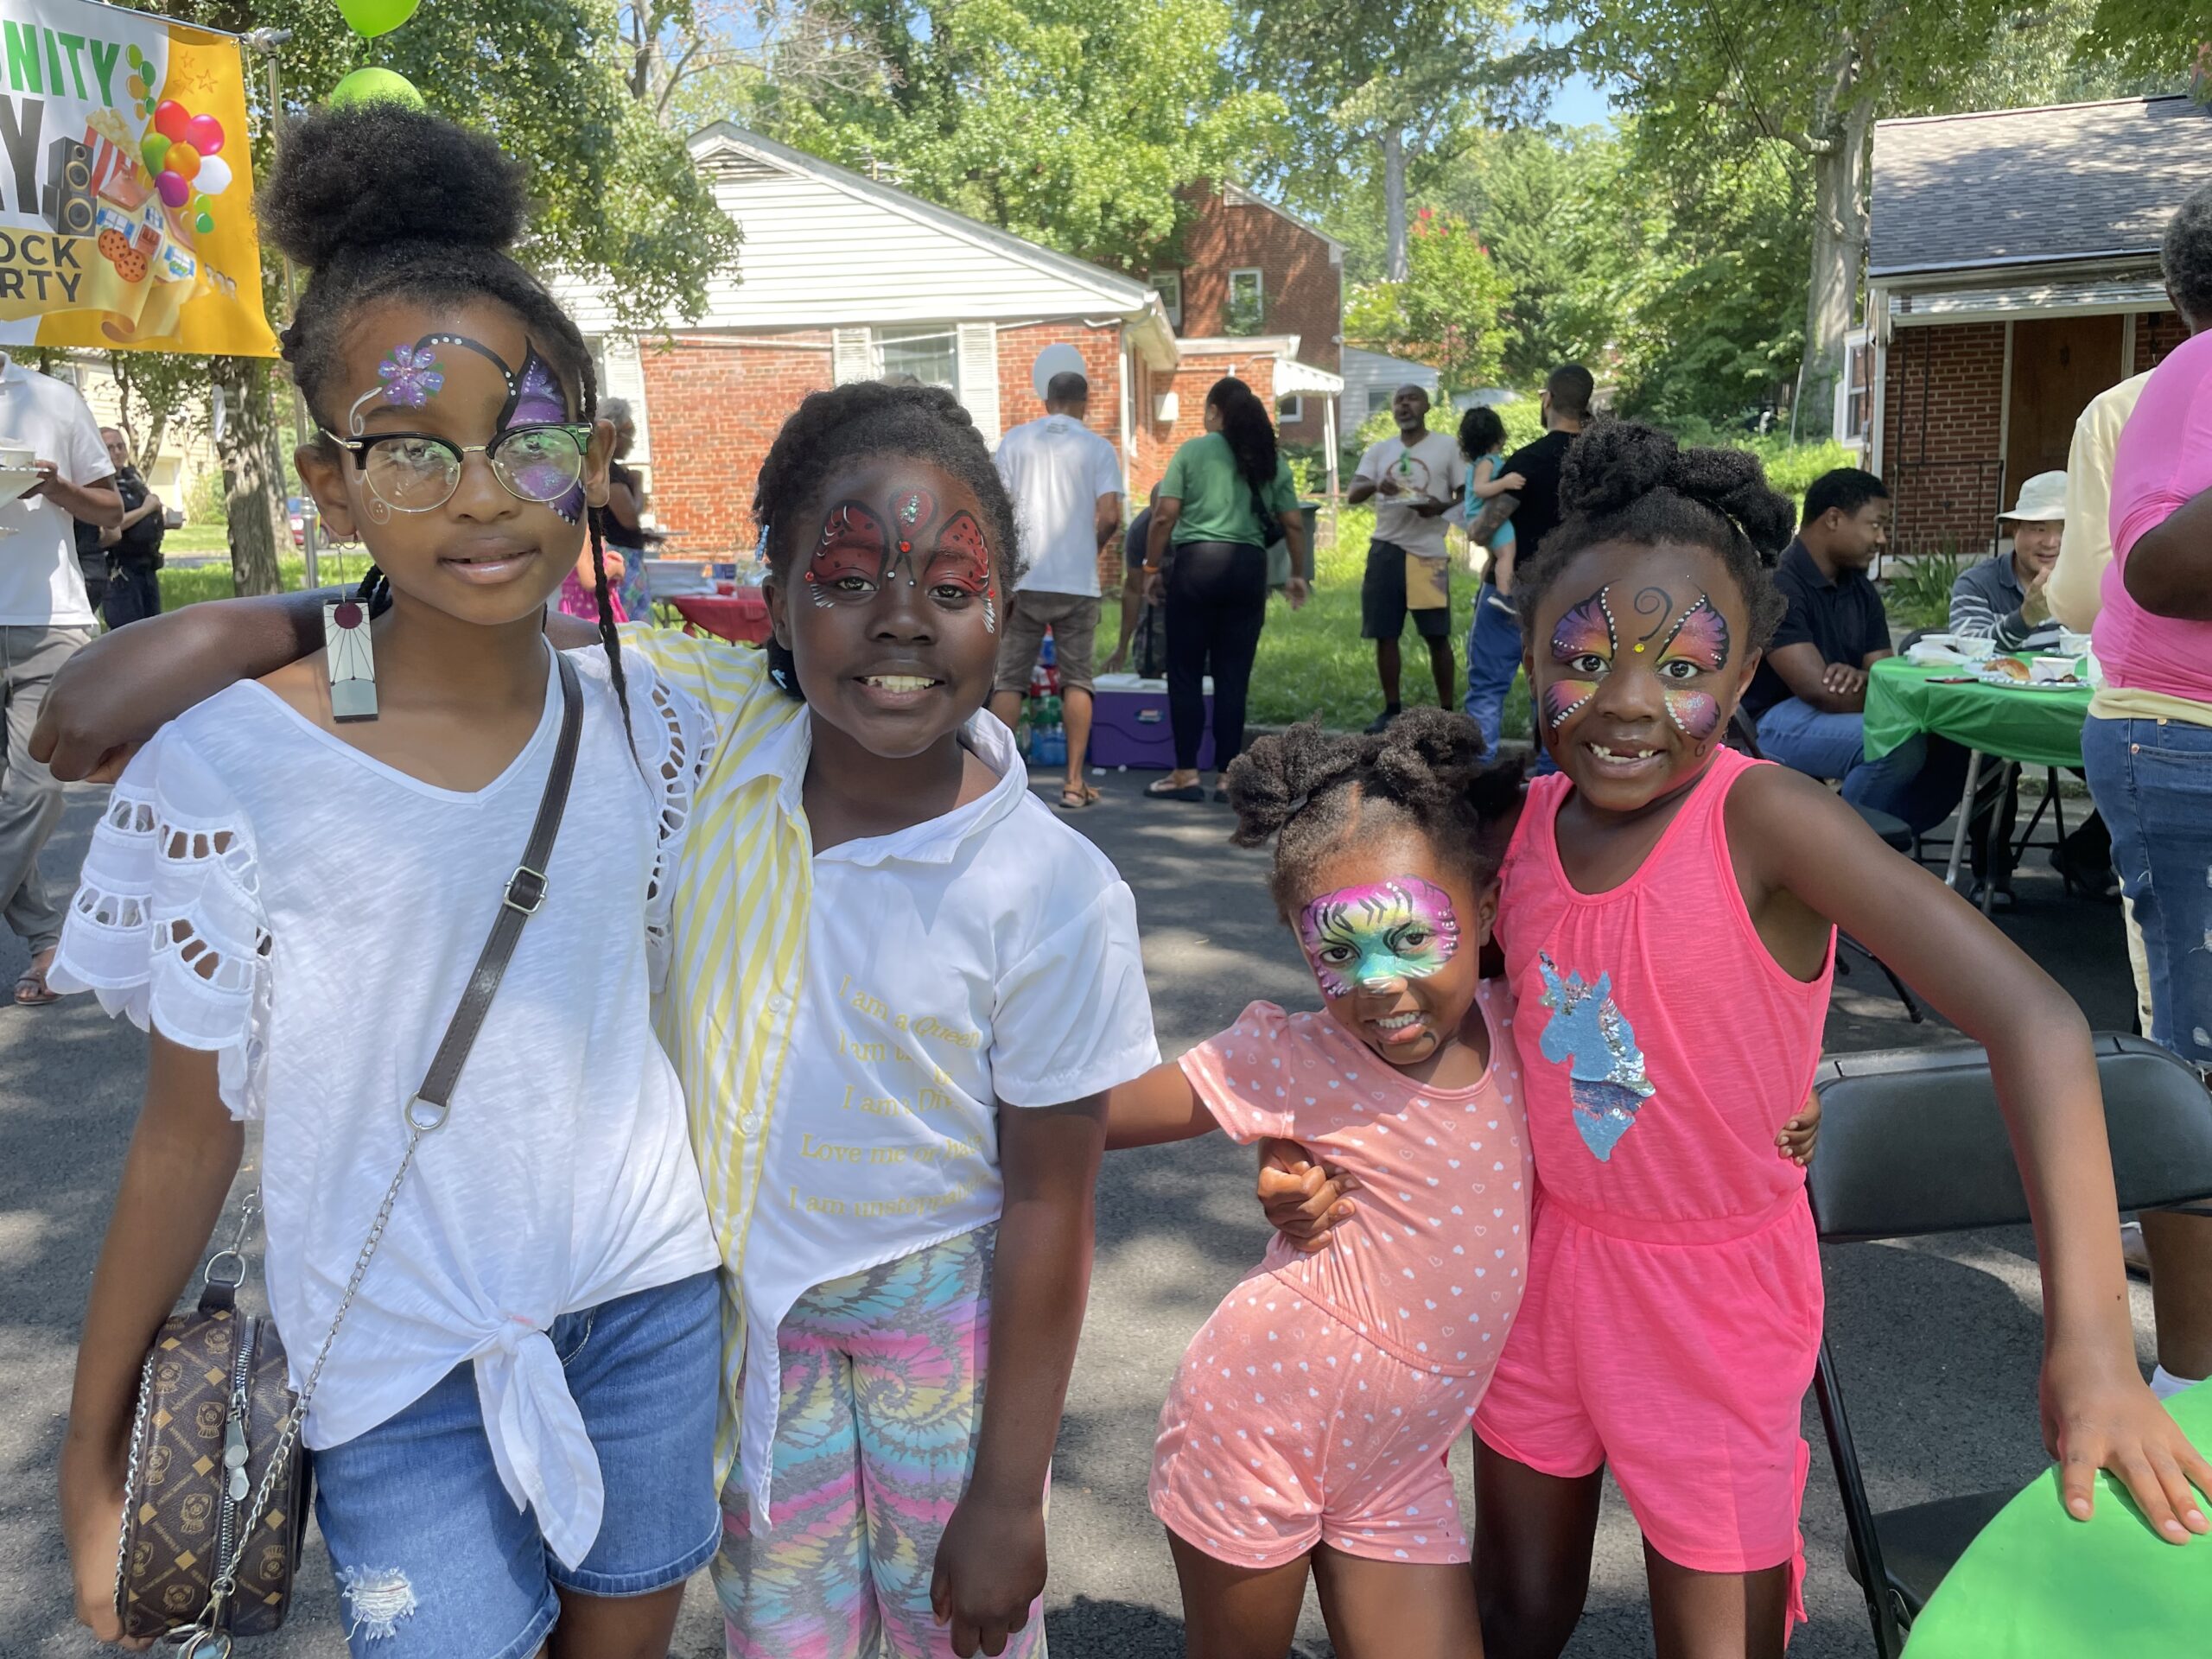 Penn-Branch-Kids-having-fun-with-Facepaint-and-Chalk-at-the-Block-Party-202